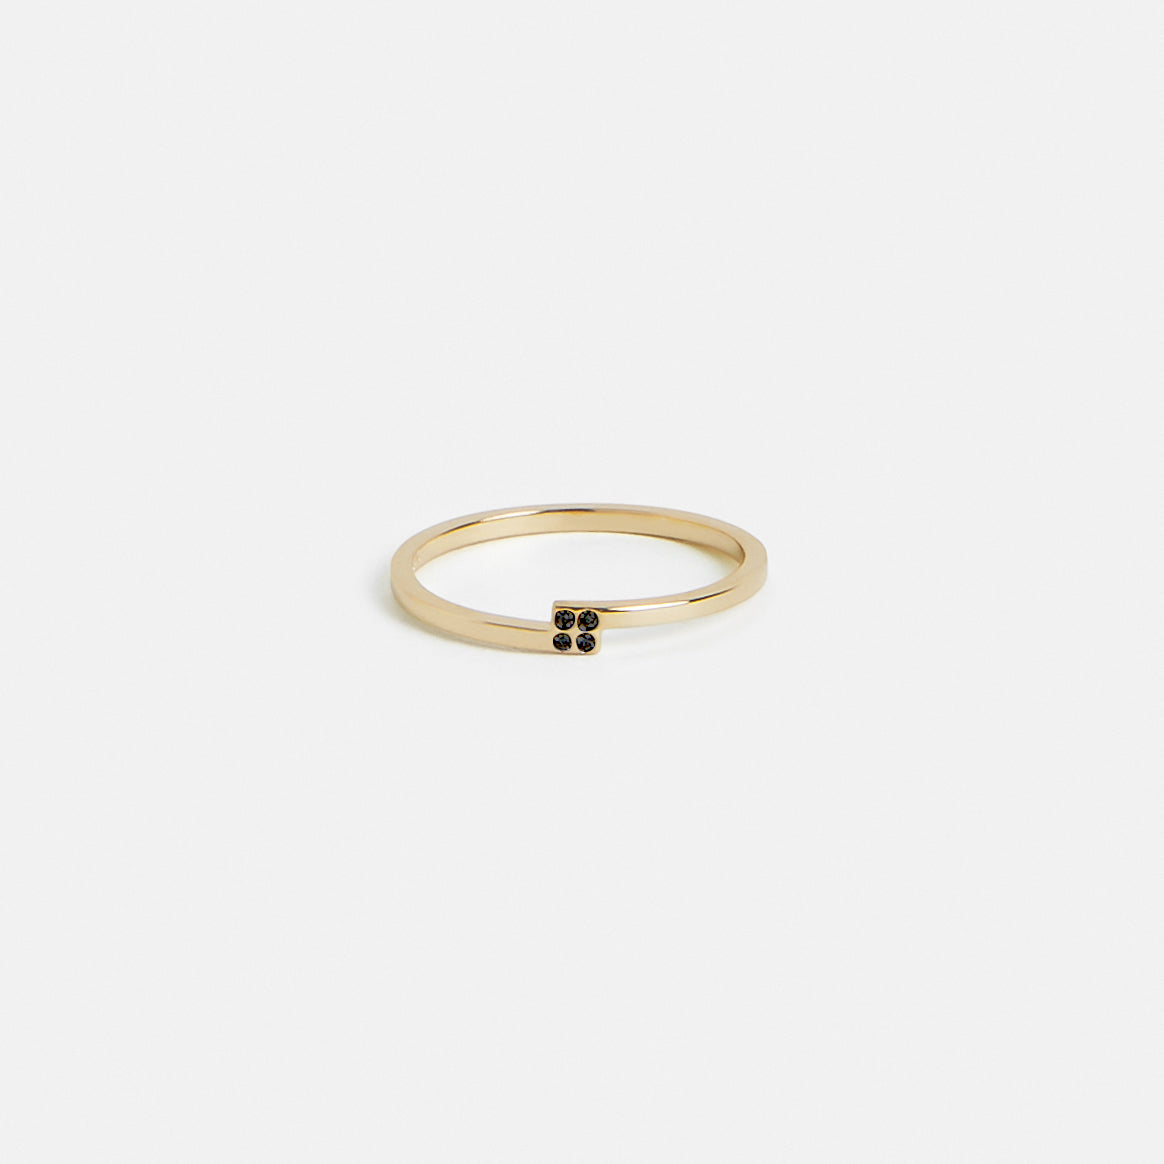 Piva Delicate Ring in 14k Gold set with Black Diamonds By SHW Fine Jewelry NYC